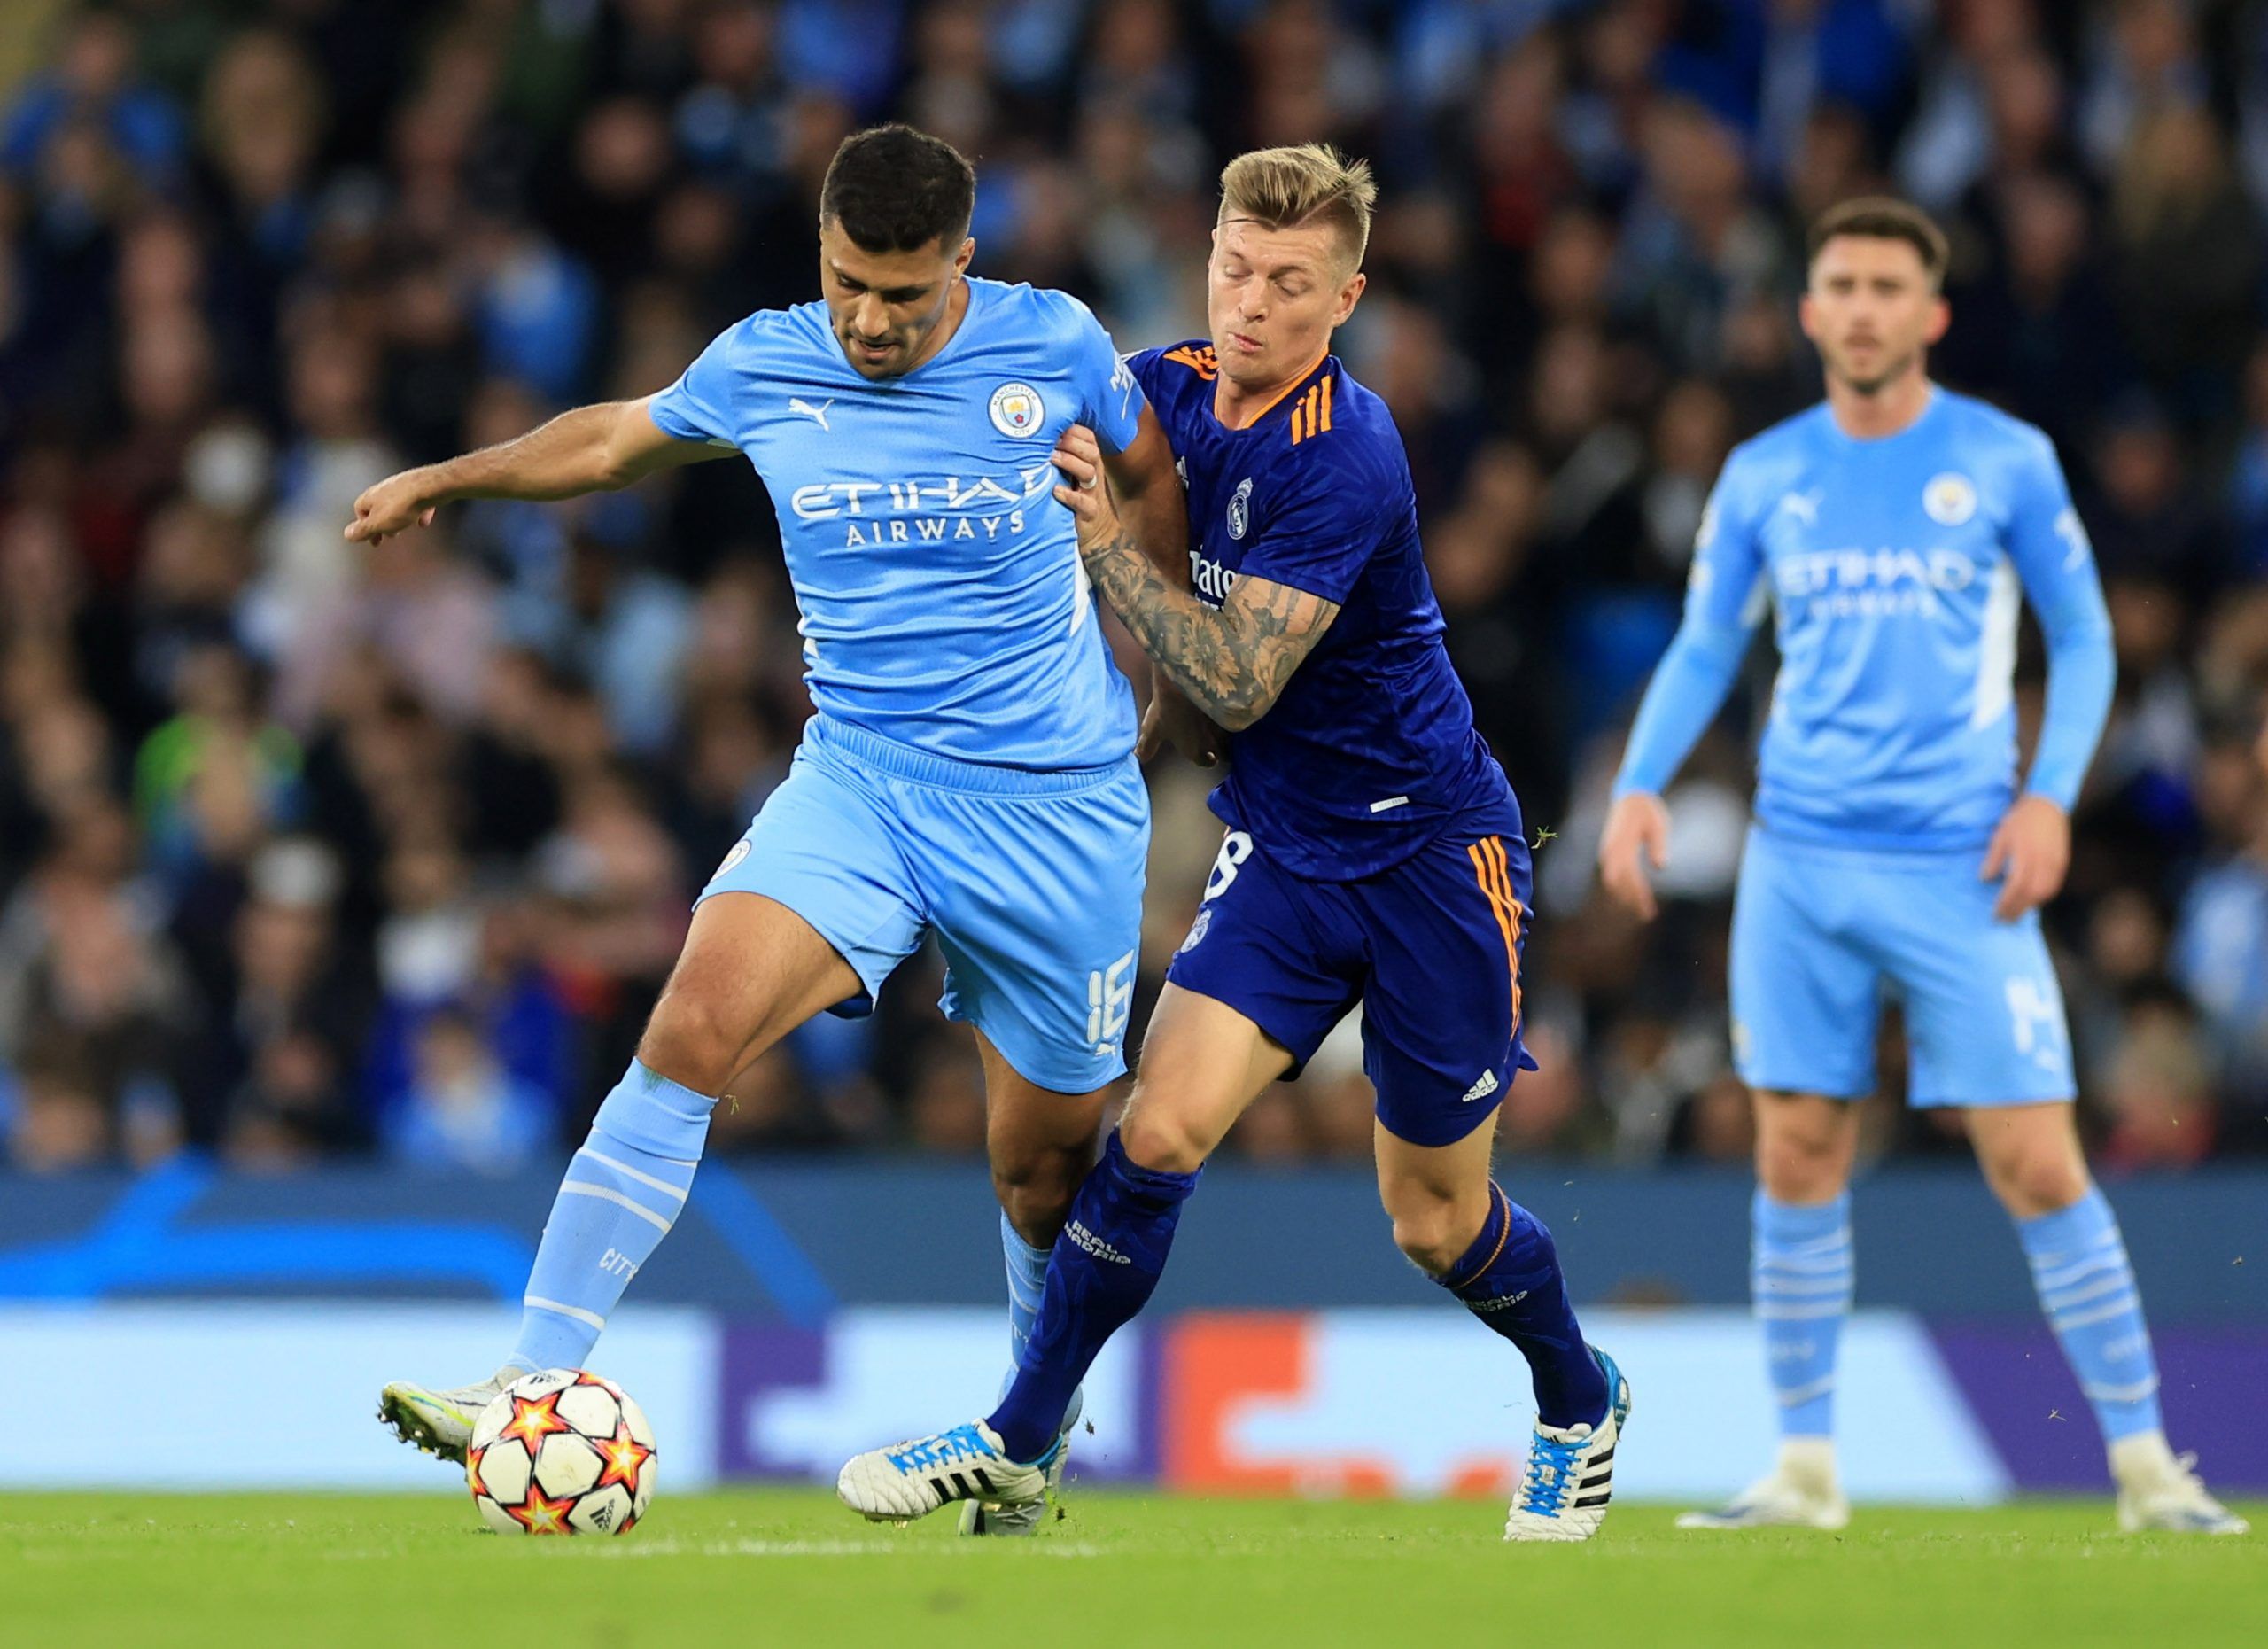 Soccer Football - Champions League - Semi Final - First Leg - Manchester City v Real Madrid - Etihad Stadium, Manchester, Britain - April 26, 2022 Manchester City's Rodri in action with Real Madrid's Toni Kroos Action Images via Reuters/Lee Smith